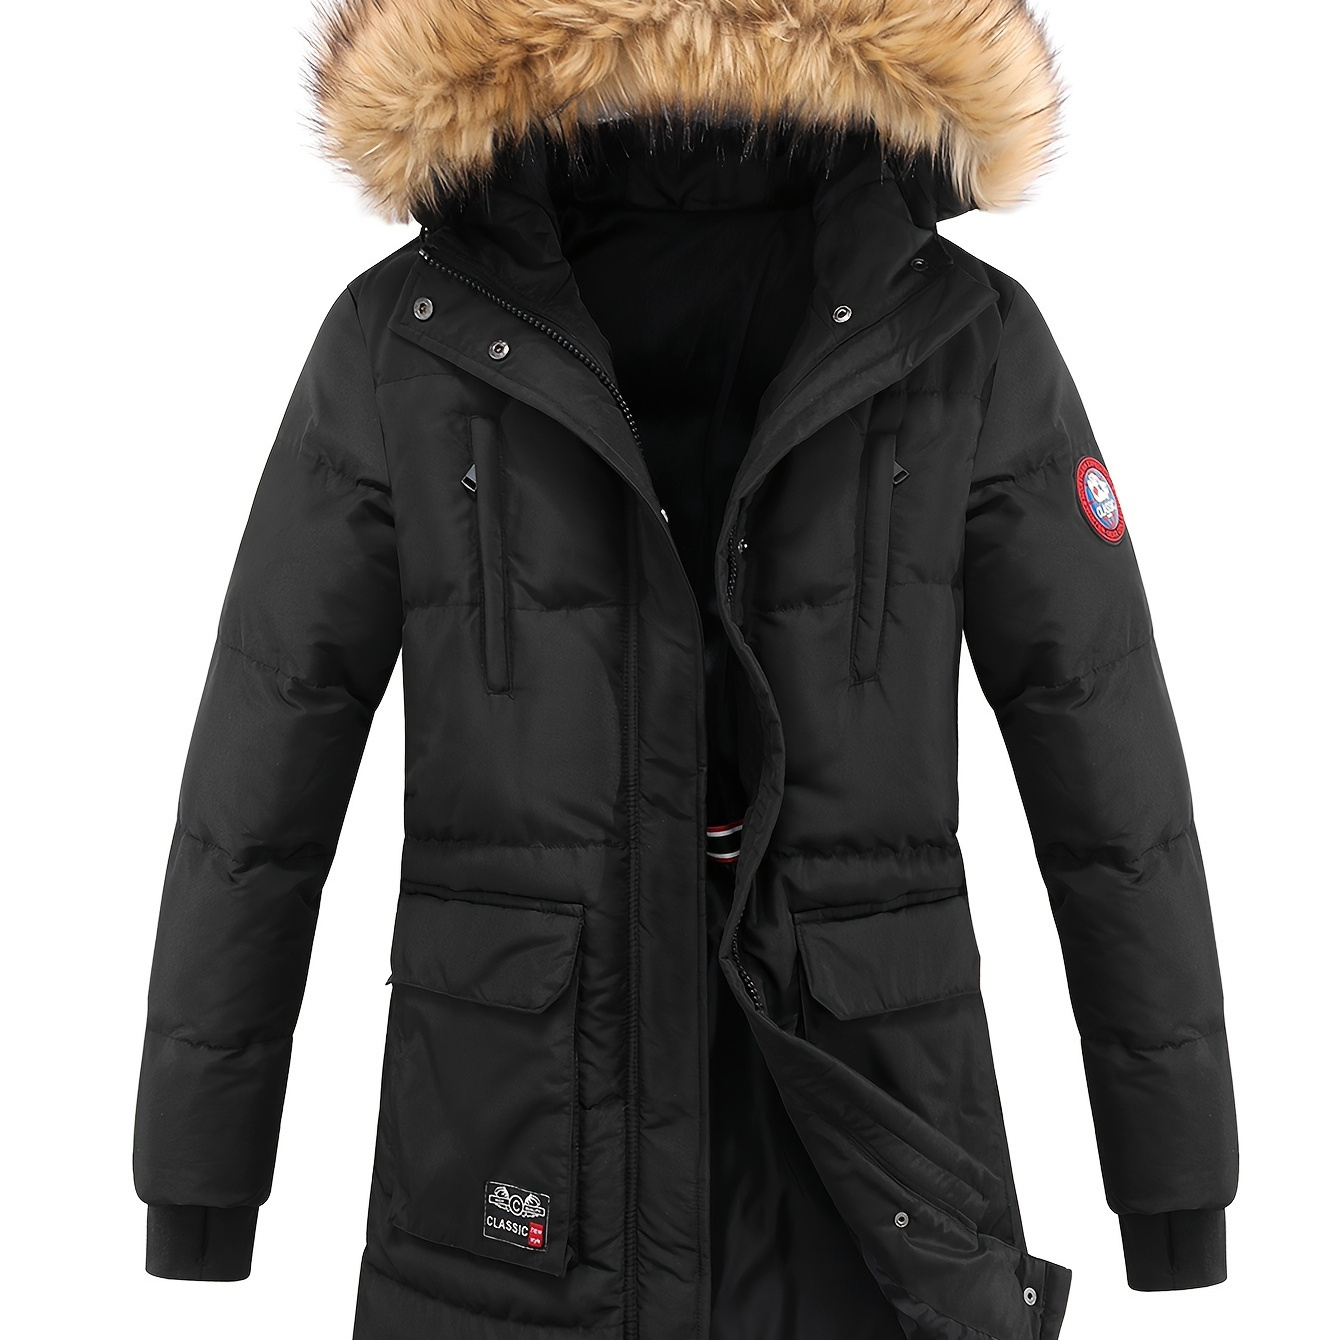 

Women's Winter Puffer Jacket, Faux Fur Collar Hooded Coat, Zip-up Snap Button Windproof Thermal Casual Jacket